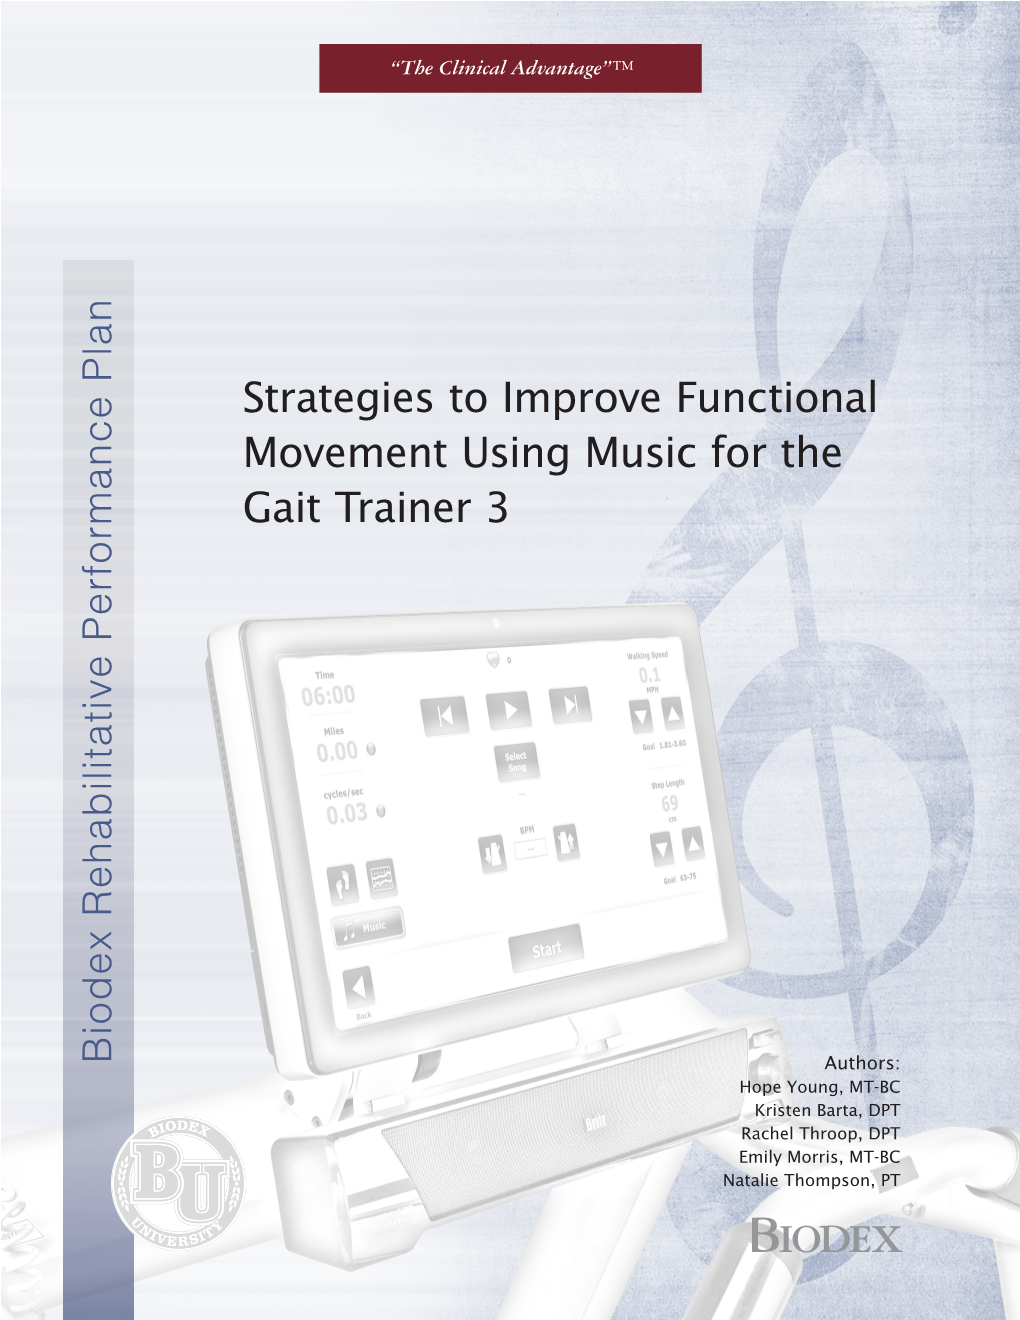 Strategies to Improve Functional Movement Using Music for the Gait Trainer 3